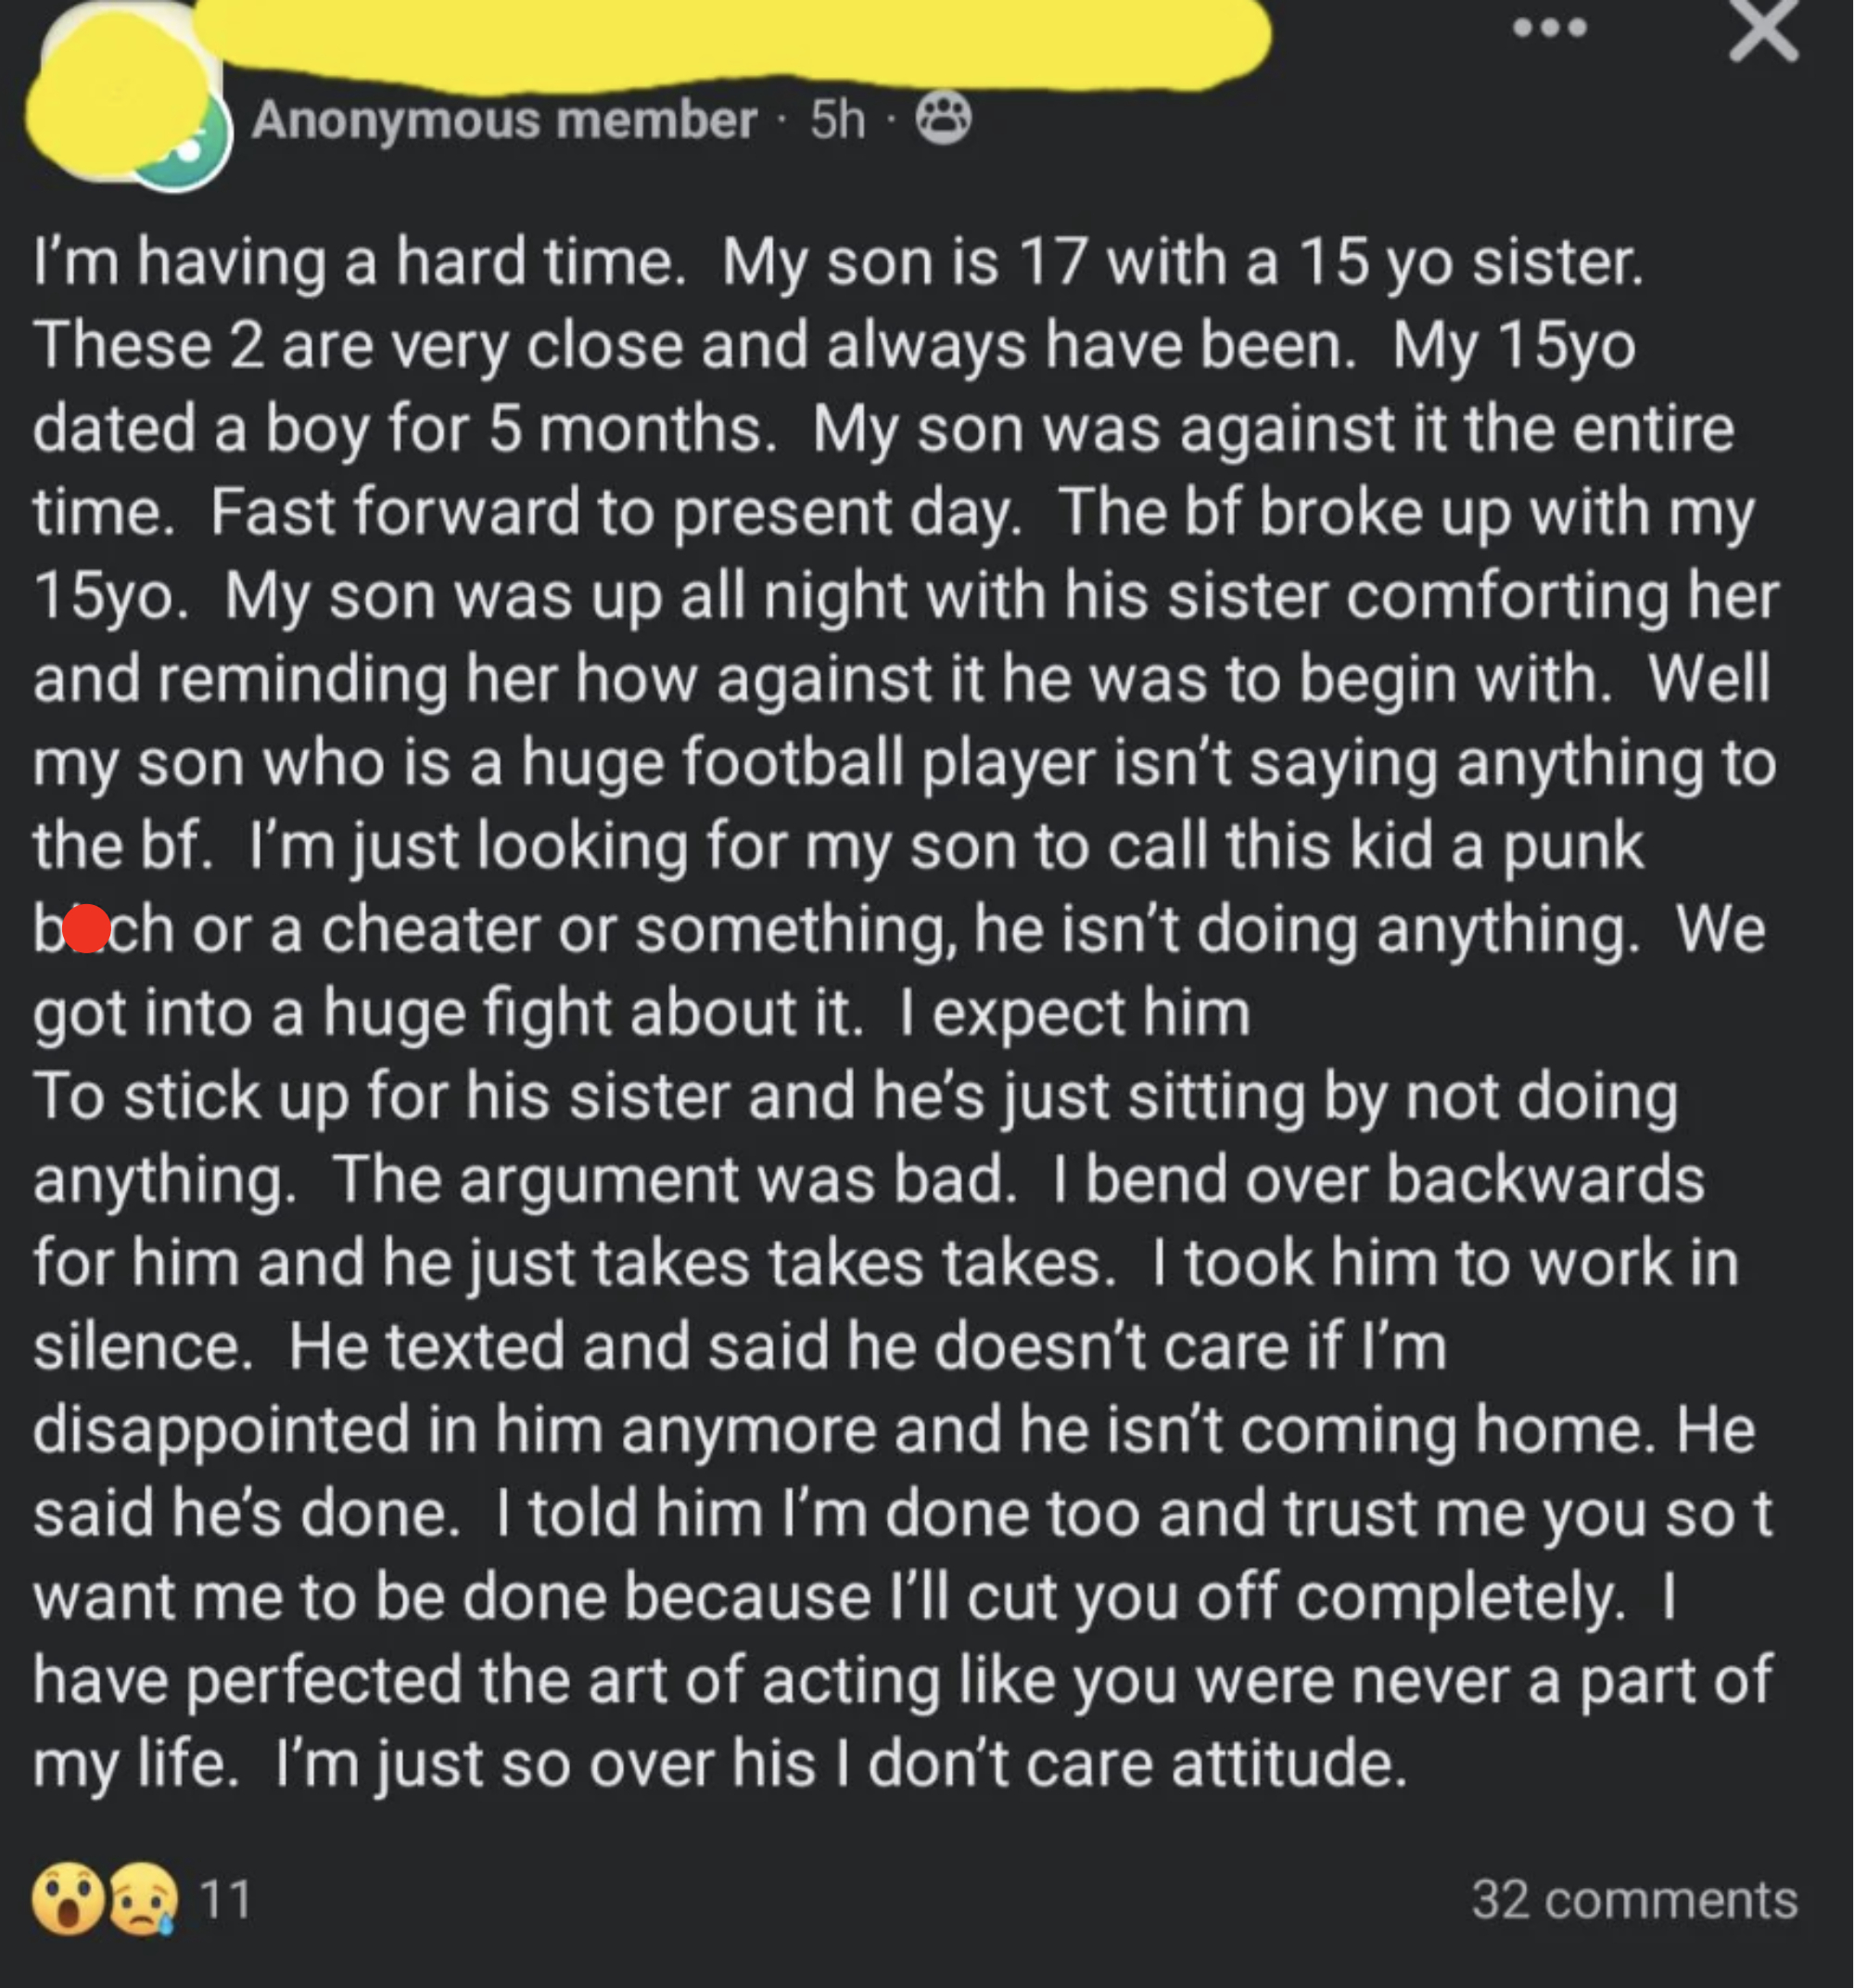 Parent argued with their 17-year-old son, who is &quot;a huge football player,&quot; for not &quot;sticking up&quot; for his 15-year-old sister by calling the guy who broke up with her &quot;a punk bitch,&quot; and now the parent is cutting him off completely